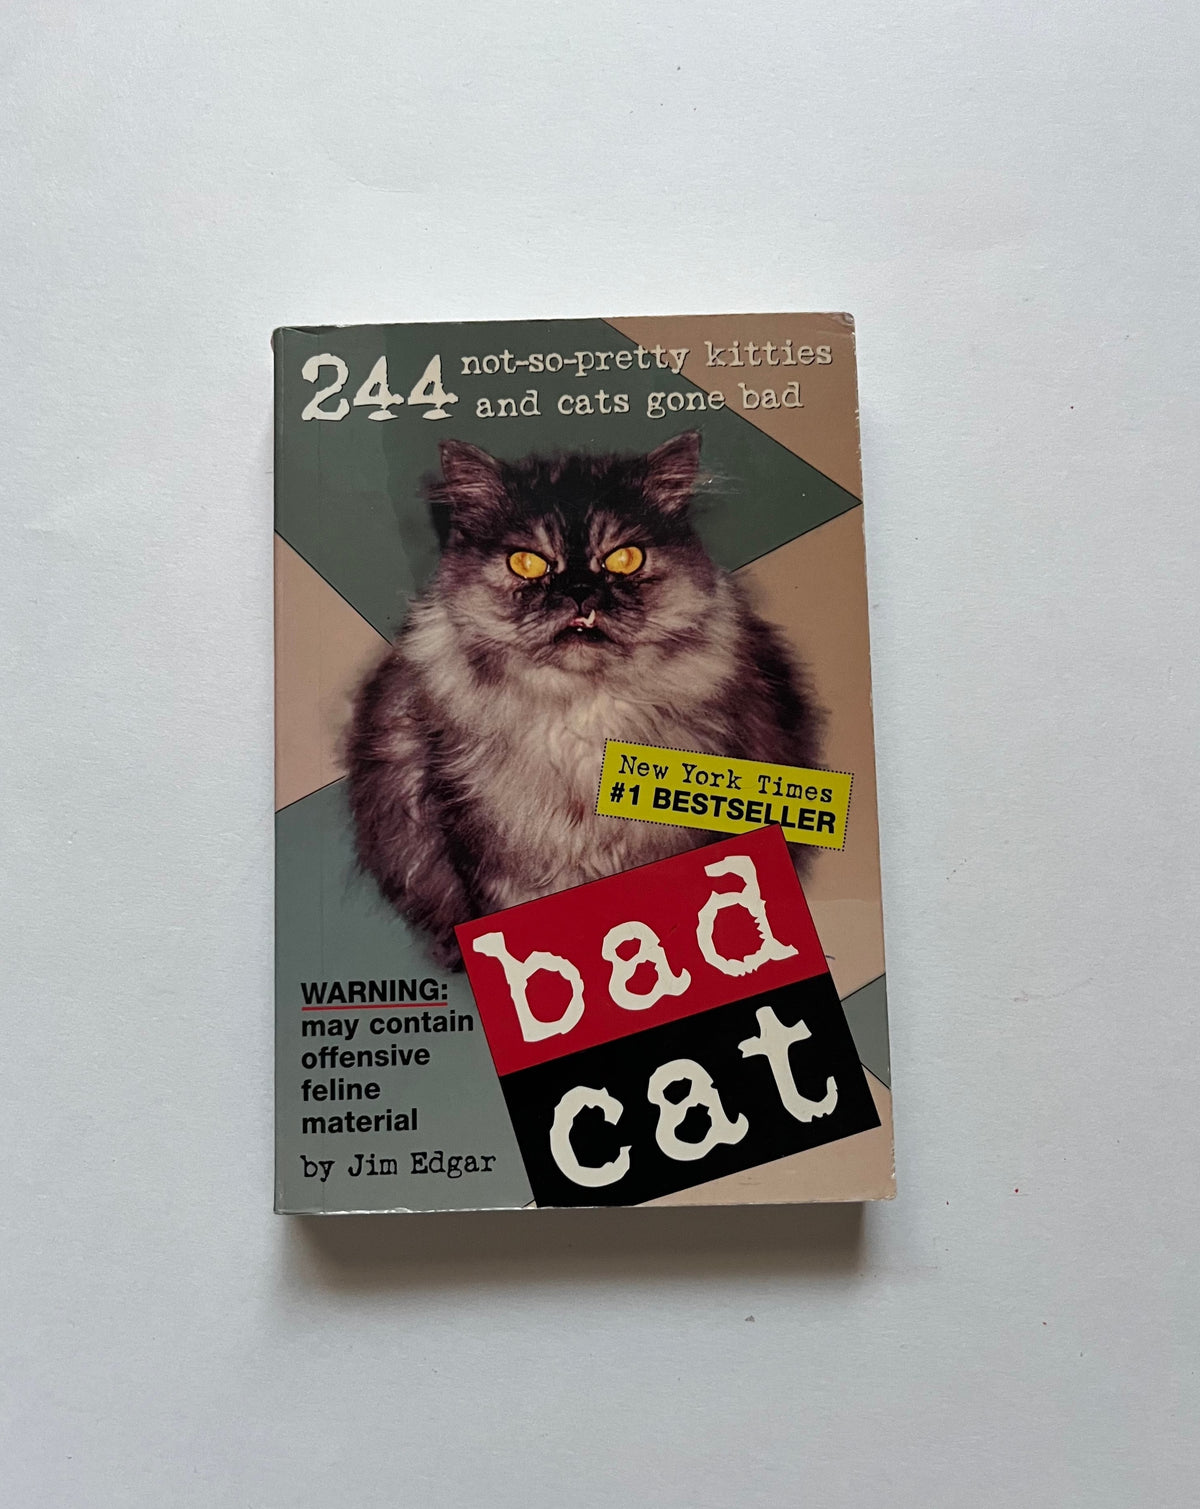 Bad Cat: 244 Not-So-Pretty Kitties and Cats Gone Bad by Jim Edgar